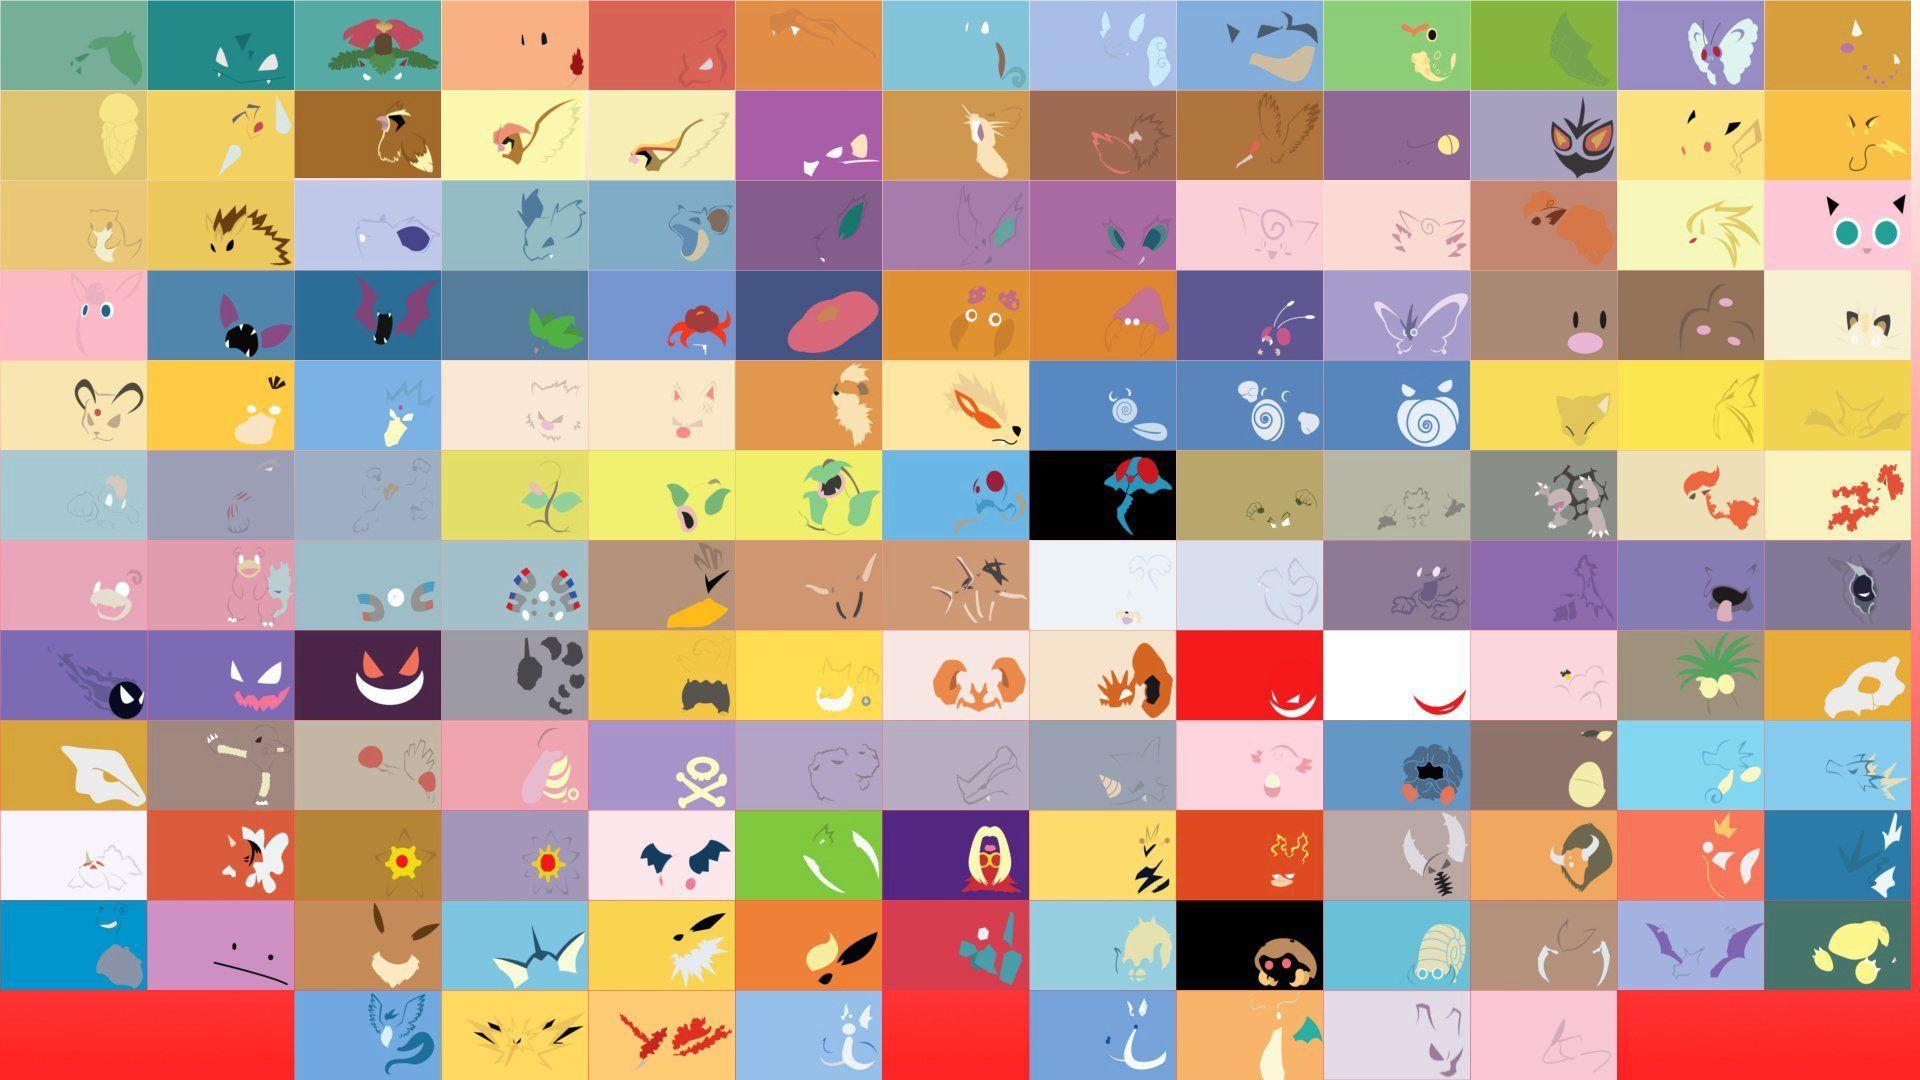 pokemon minimalism textures flowers the cell picture symbol game